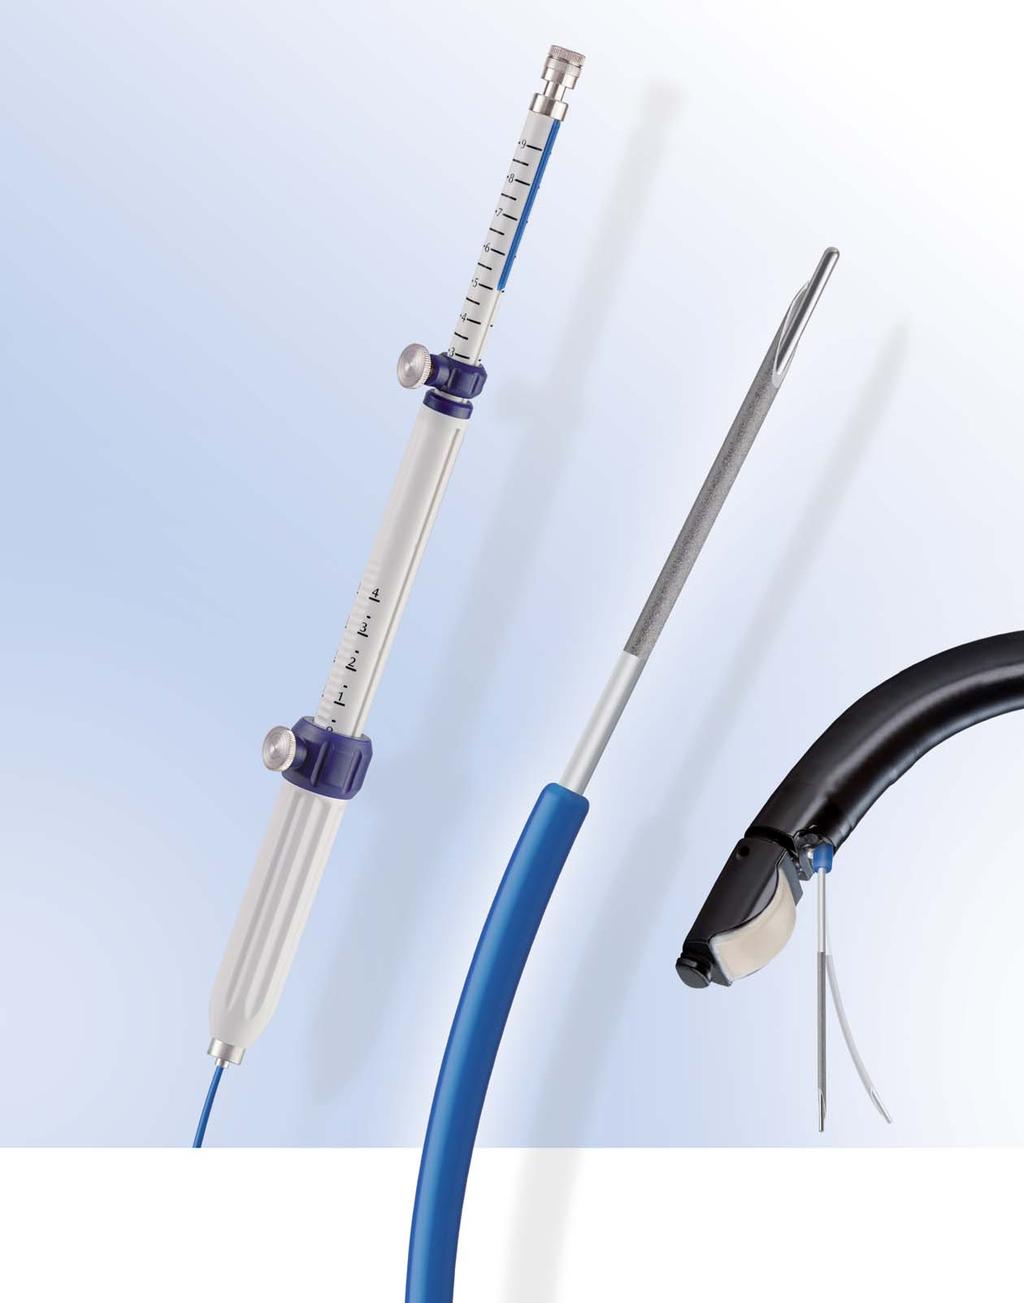 SonoTip II EBUS-TBNA Endobronchial Ultrasound-Guided TBNA System Single Use SonoTip II EBUS-TBNA Dimensionally Stable Nitinol Needle (EBUS Flex) Prevents the Permanently Bent Needle Effect During